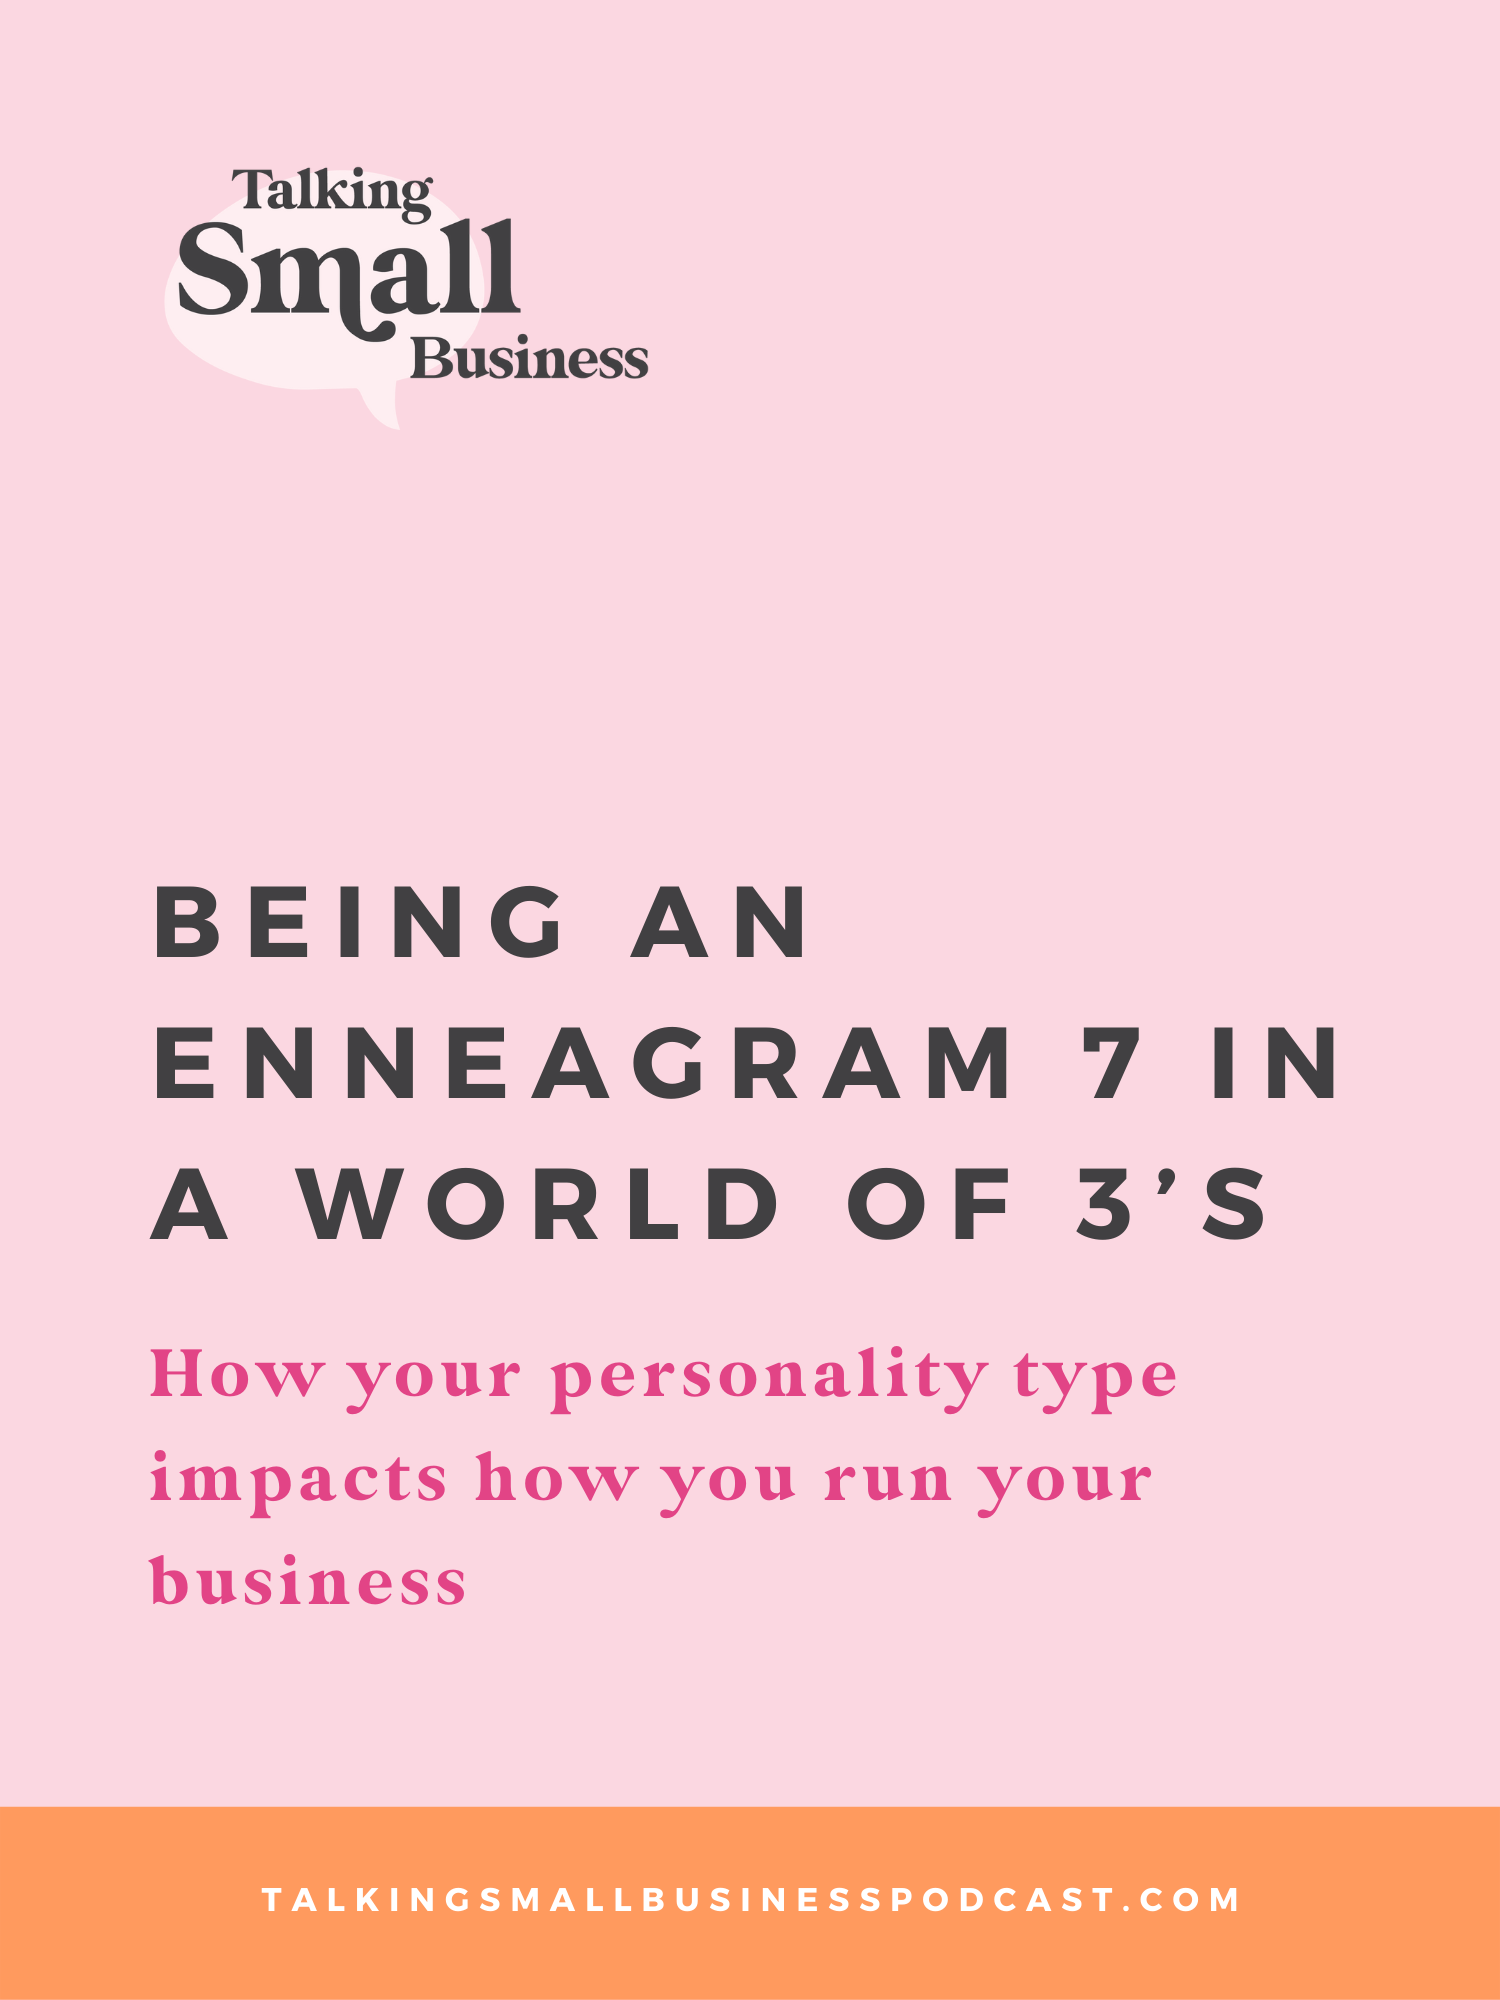 Being an Enneagram 7 in a World of 3’s: A Candid Conversation on Talking Small Business with Kat Schmoyer and Megan Martin